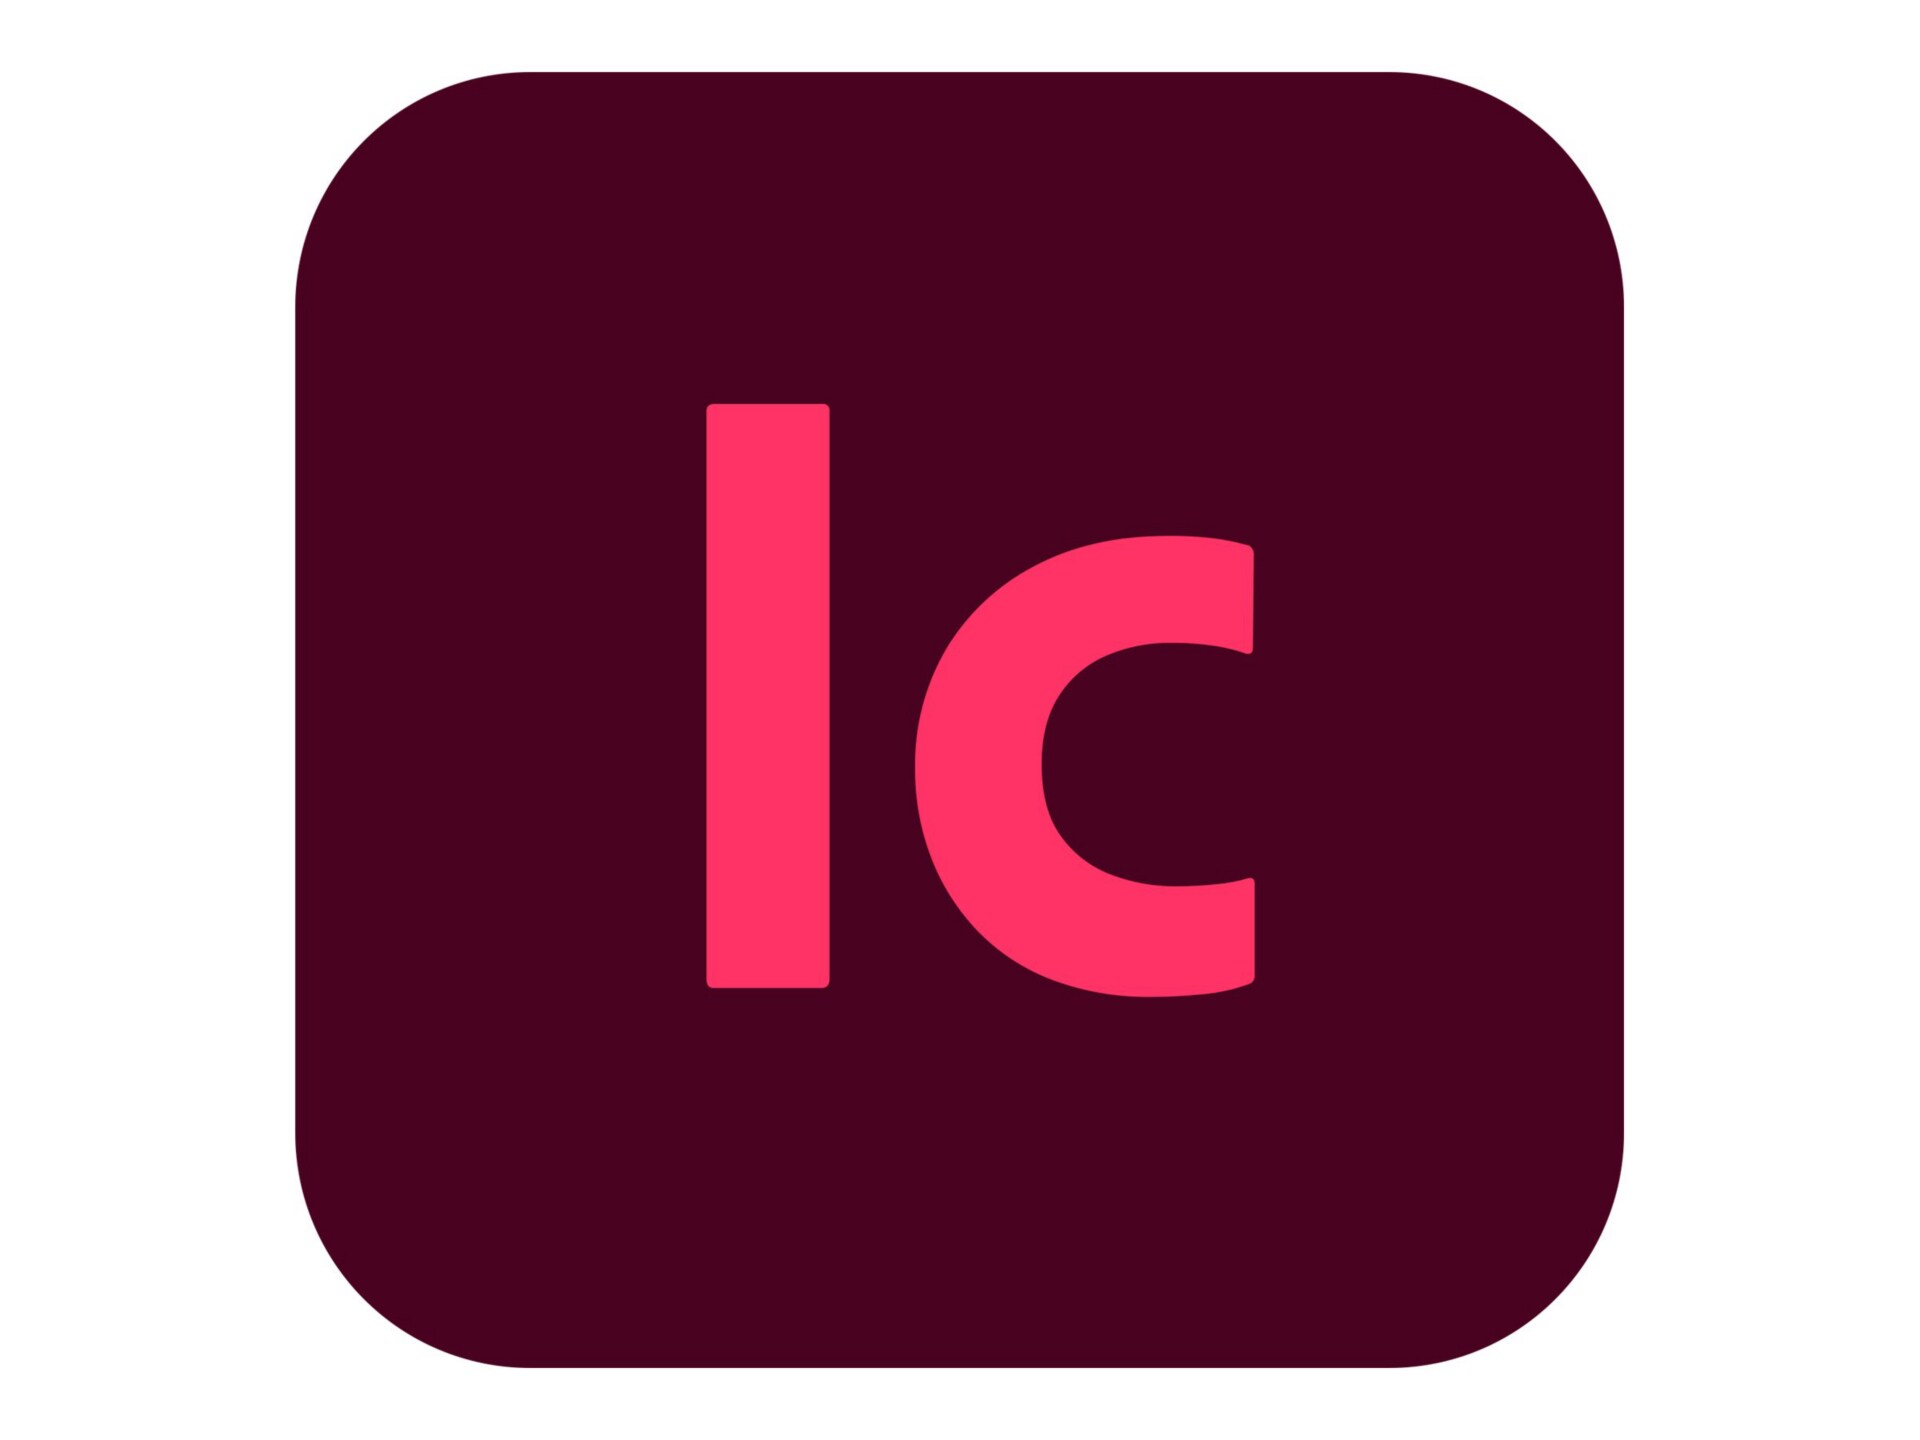 Adobe InCopy CC - Subscription New (18 months) - 1 user